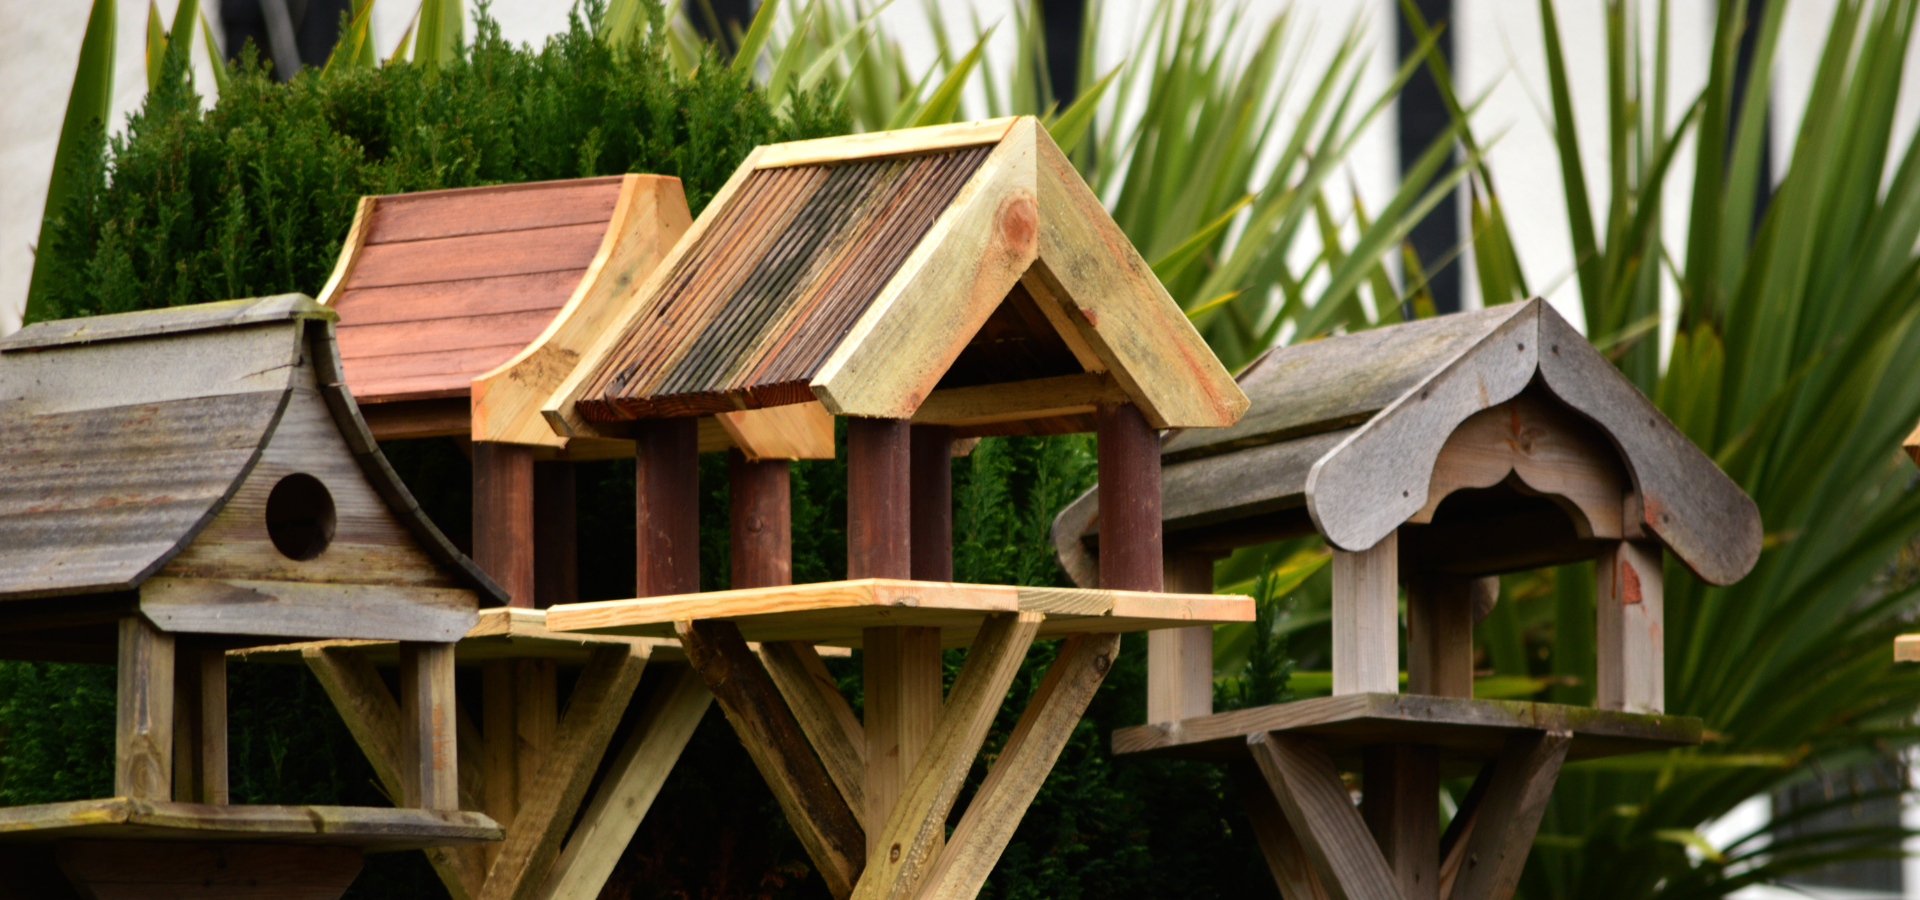 A collection of wooden bird tables